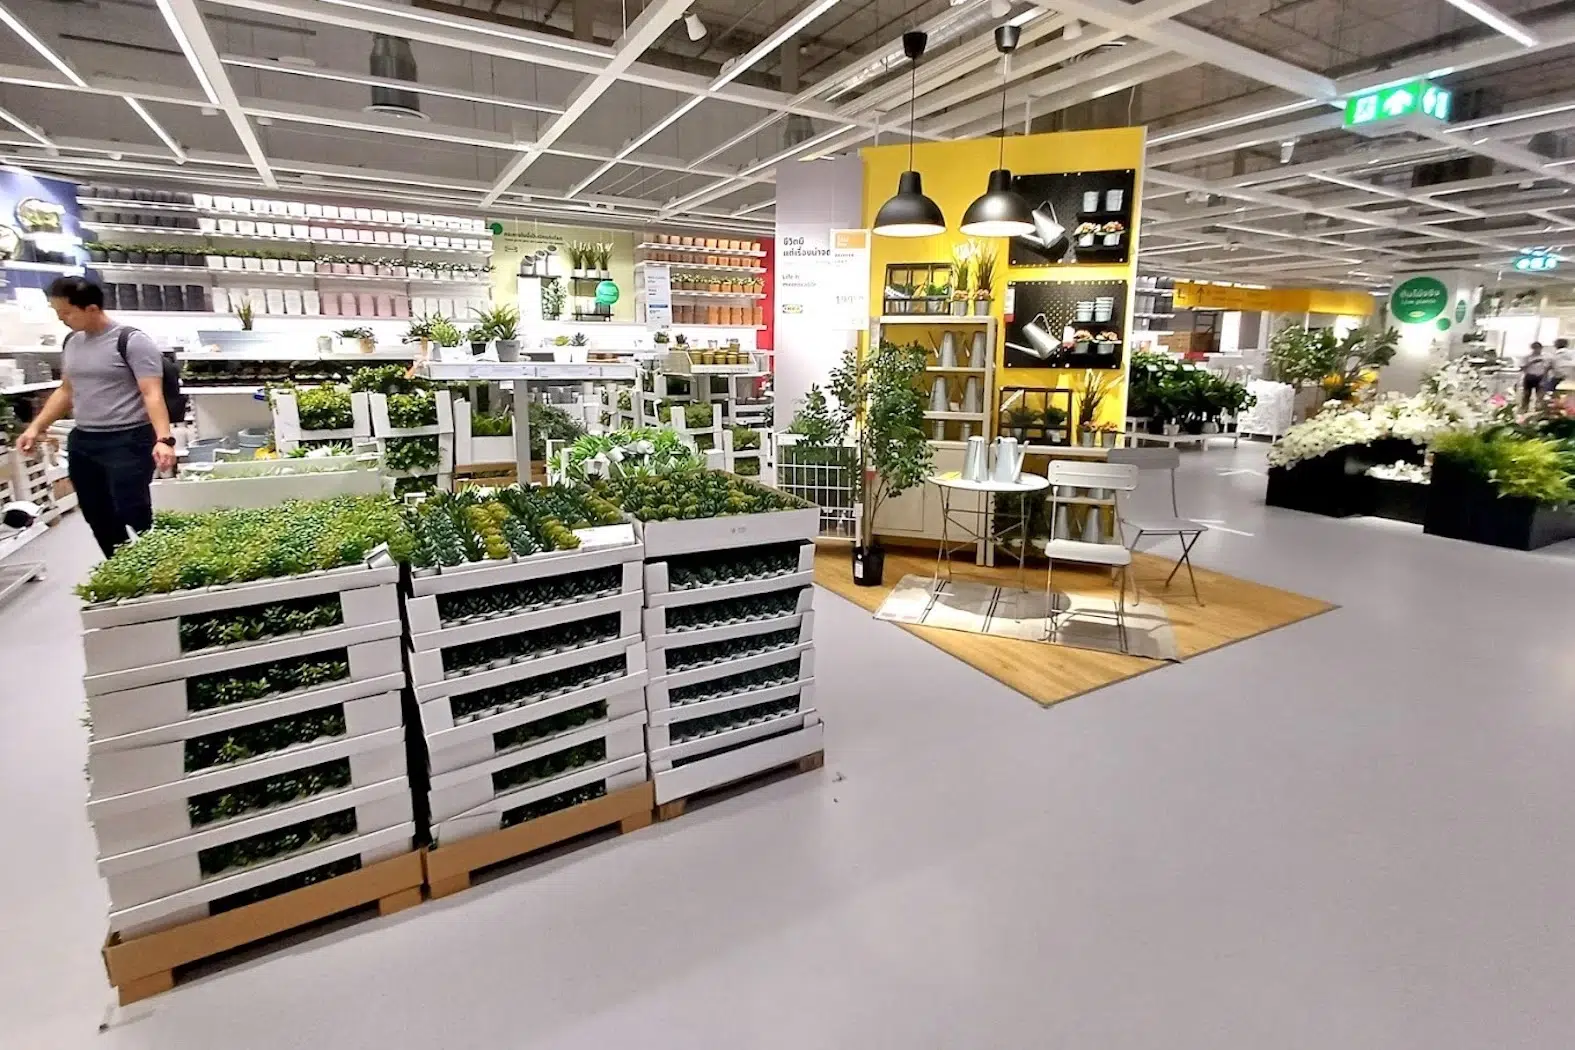 This is the plant store of IKEA in Emsphere Mall in Bangkok.